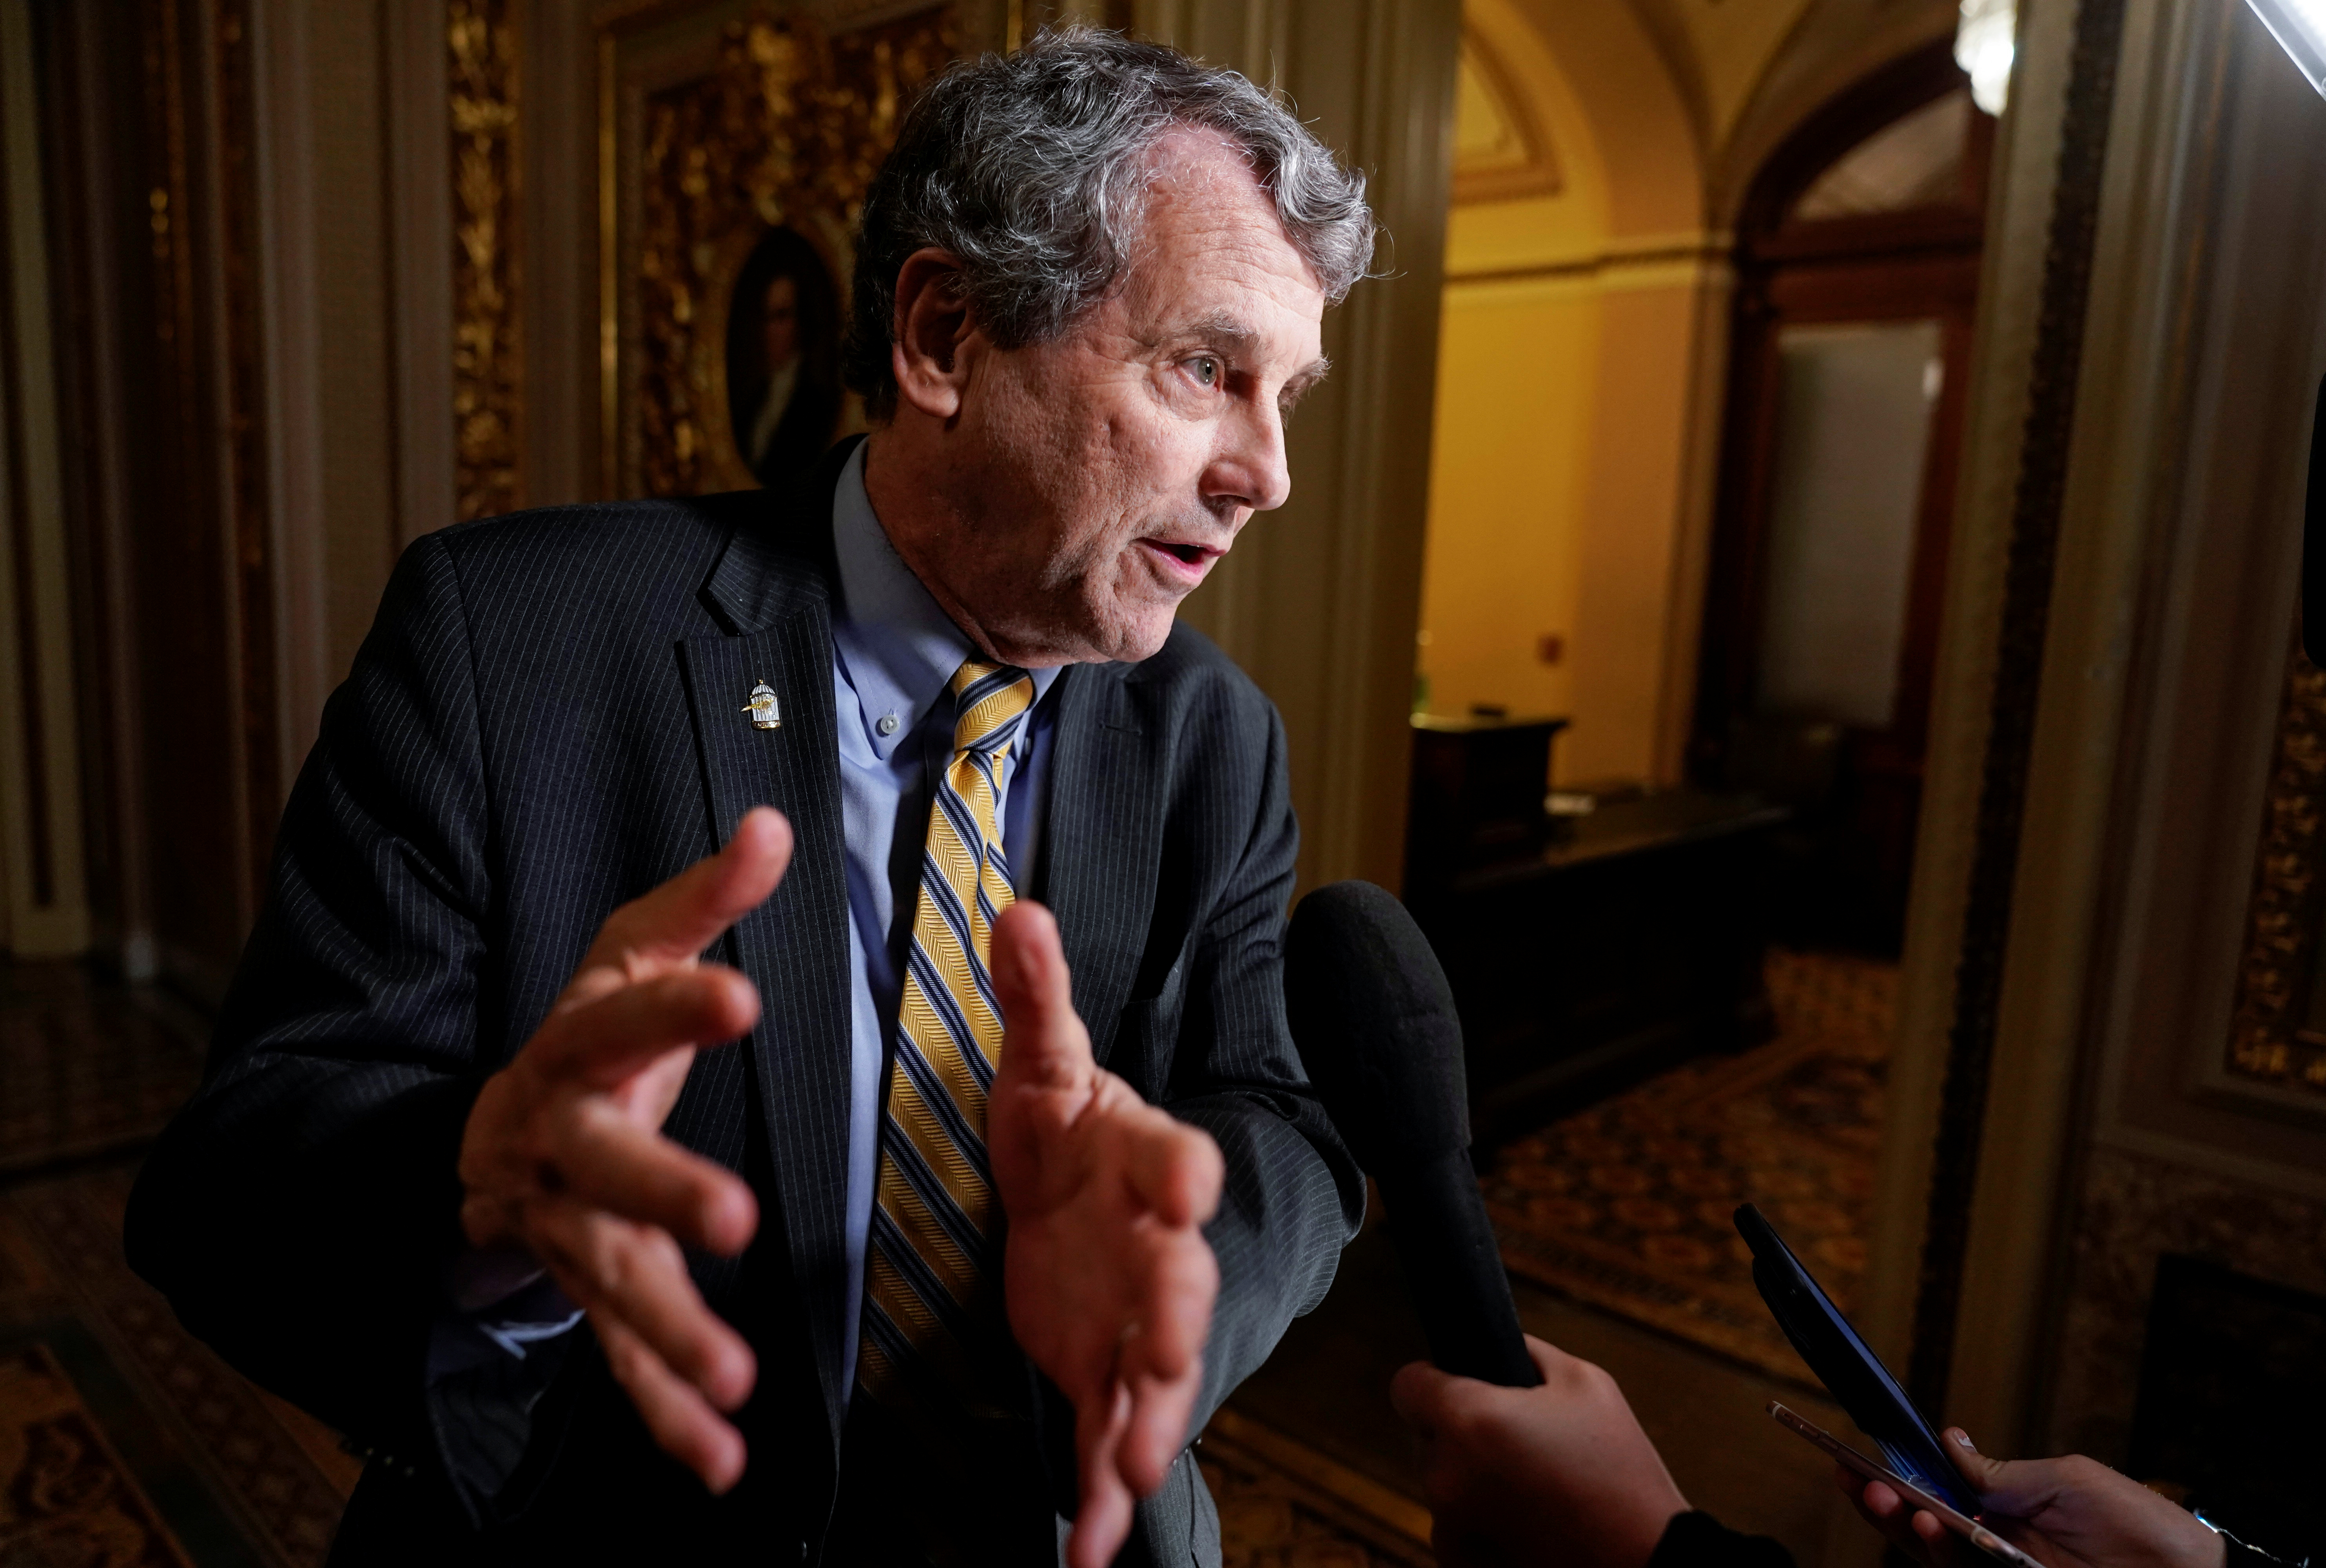 Senator Brown speaks to reporters during a break as the Trump impeachment trial continues in Washington.